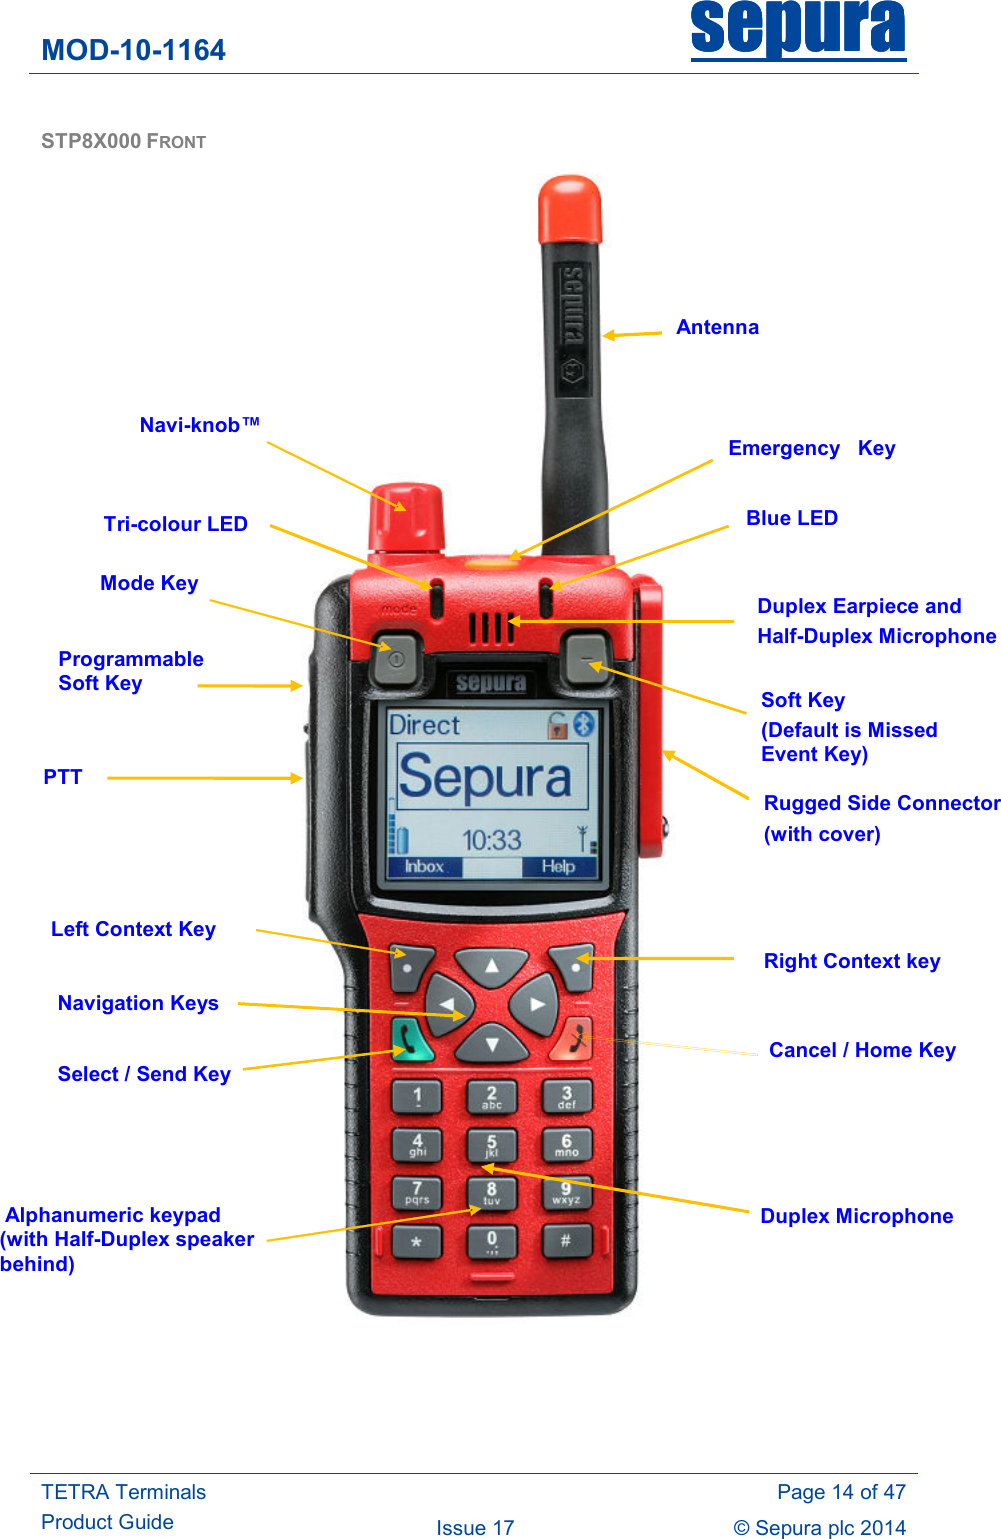 MOD-10-1164 sepurasepurasepurasepura     TETRA Terminals Product Guide   Page 14 of 47 Issue 17  © Sepura plc 2014   STP8X000 FRONT  Emergency   Key  Navi-knob™  Mode Key PTT  Navigation Keys Select / Send Key Duplex Earpiece and  Half-Duplex Microphone  - Cancel / Home Key  Alphanumeric keypad (with Half-Duplex speaker behind) Duplex Microphone Blue LED Antenna Left Context Key Right Context key Programmable Soft Key  Tri-colour LED Soft Key (Default is Missed Event Key) Rugged Side Connector (with cover) 